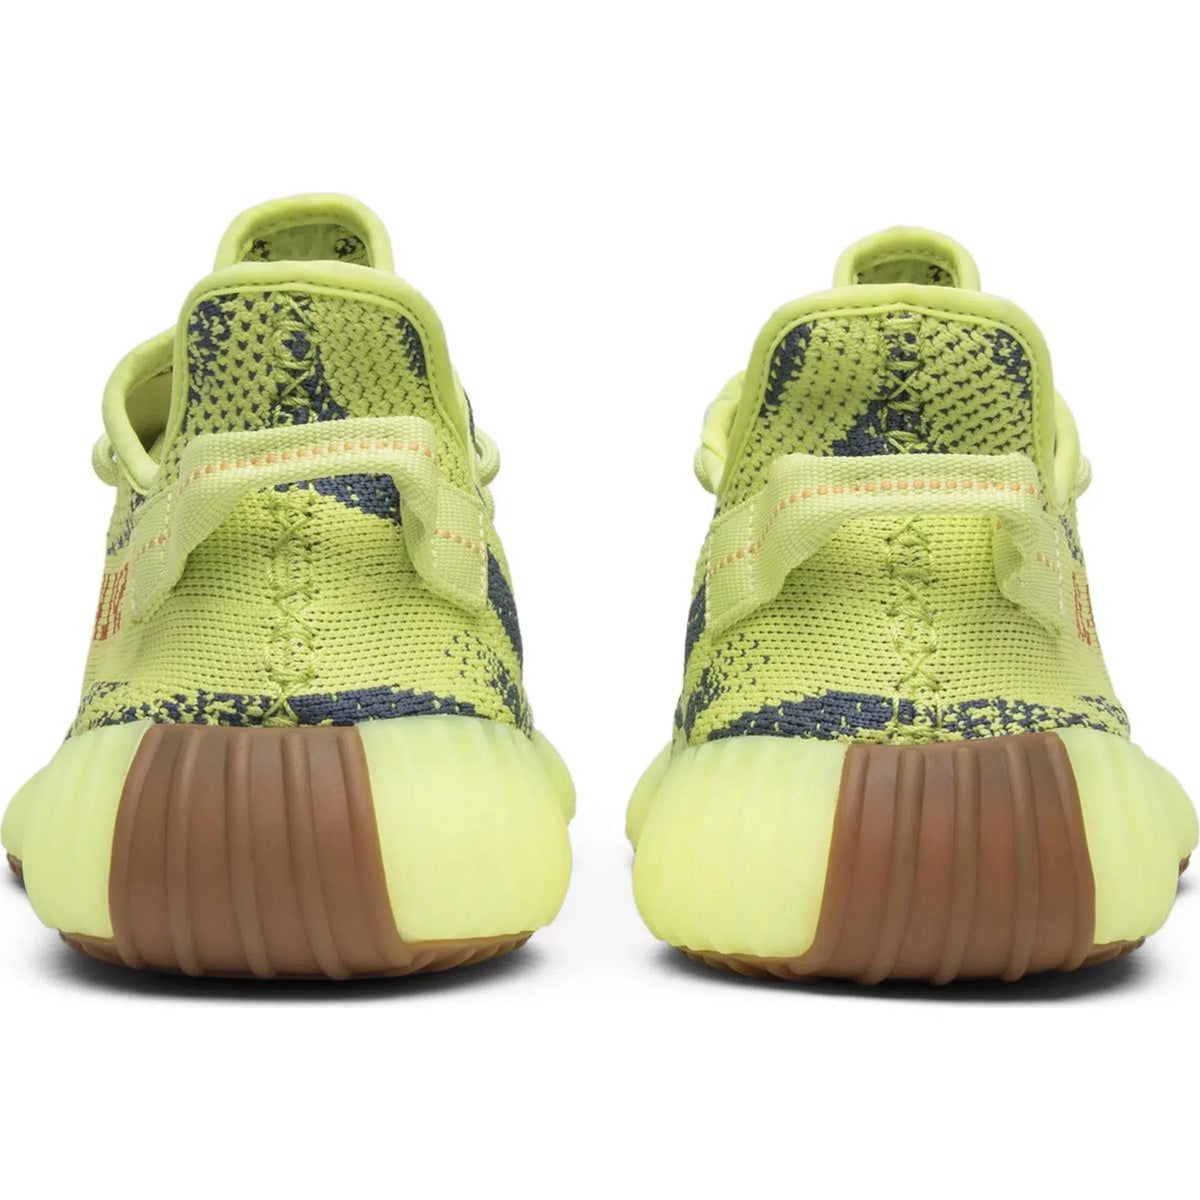 Adidas Yeezy Boost 350 V2 &#39;Semi Frozen Yellow&#39; | Waves Never Die | Adidas | Sneakers